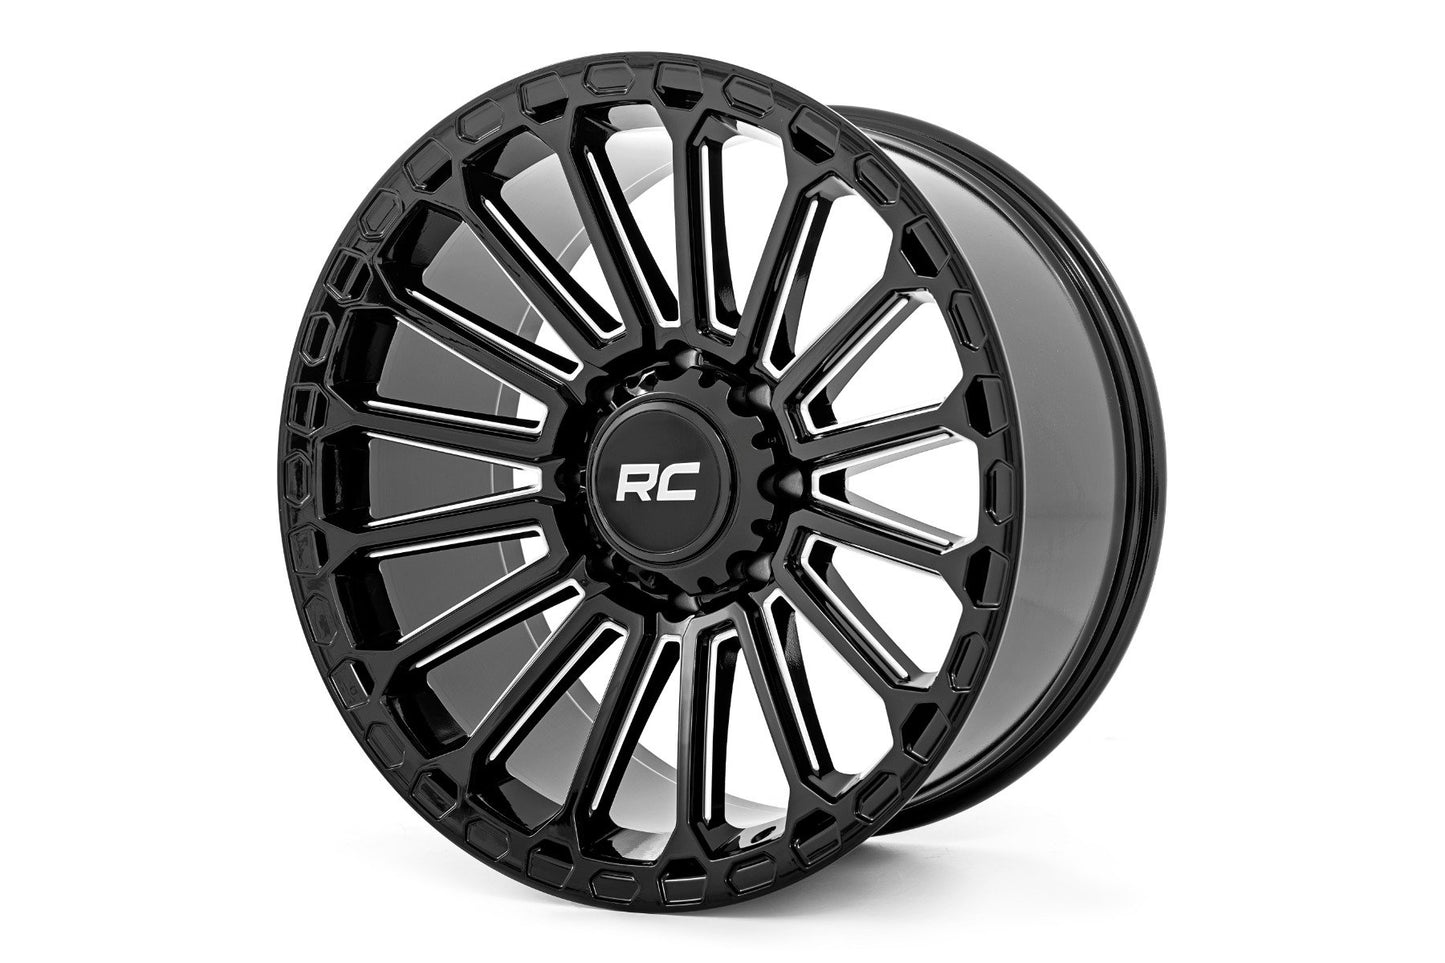 Rough Country 97 Series Wheel | One-Piece | Gloss Black | 20x10 | 8x6.5 | -19mm